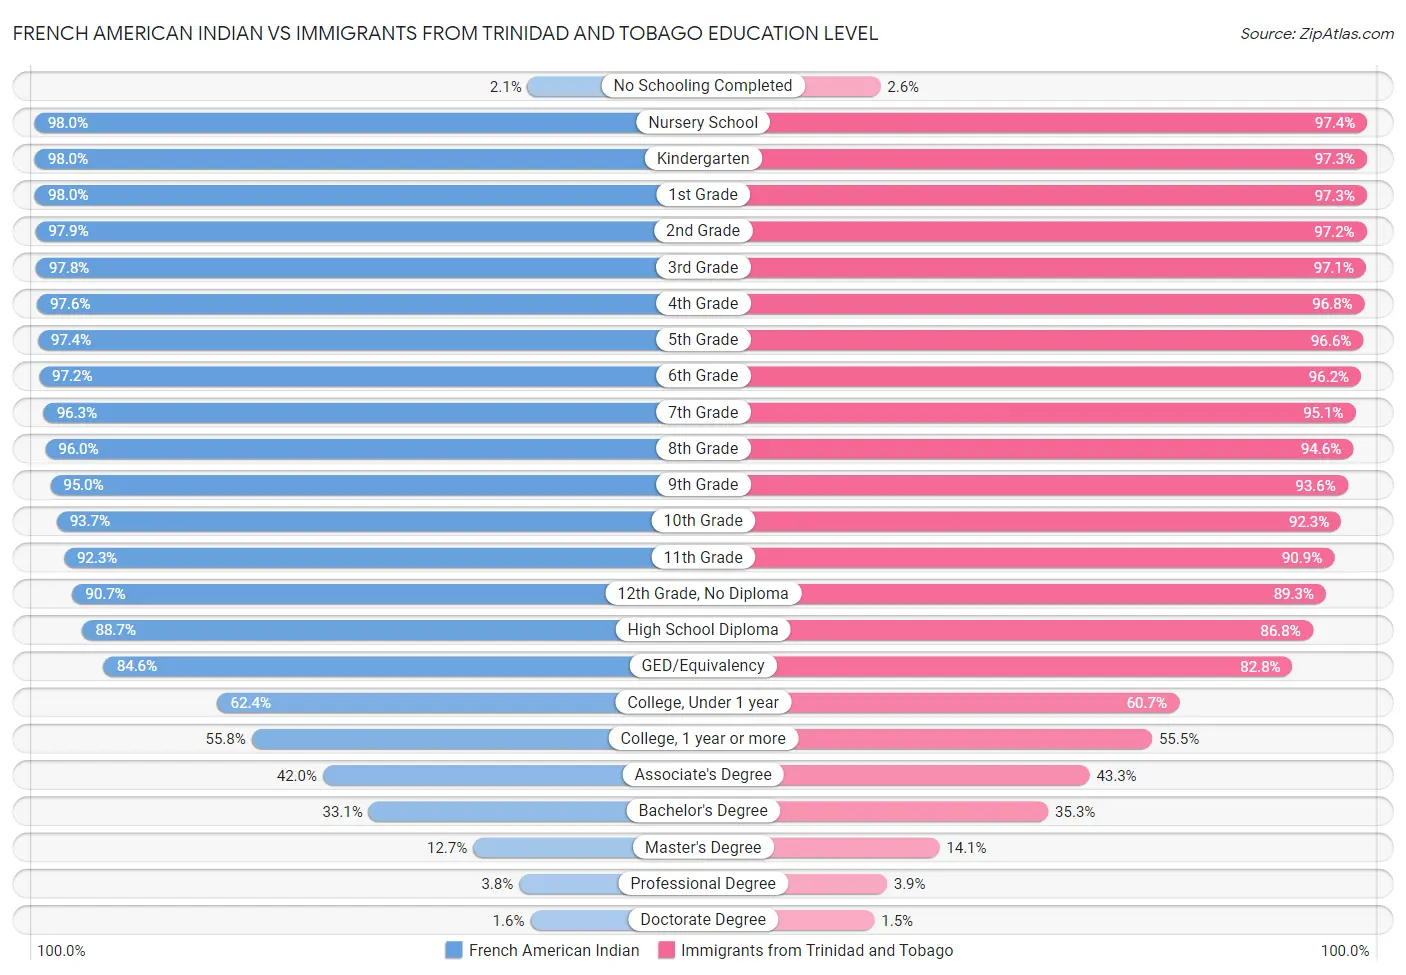 French American Indian vs Immigrants from Trinidad and Tobago Education Level